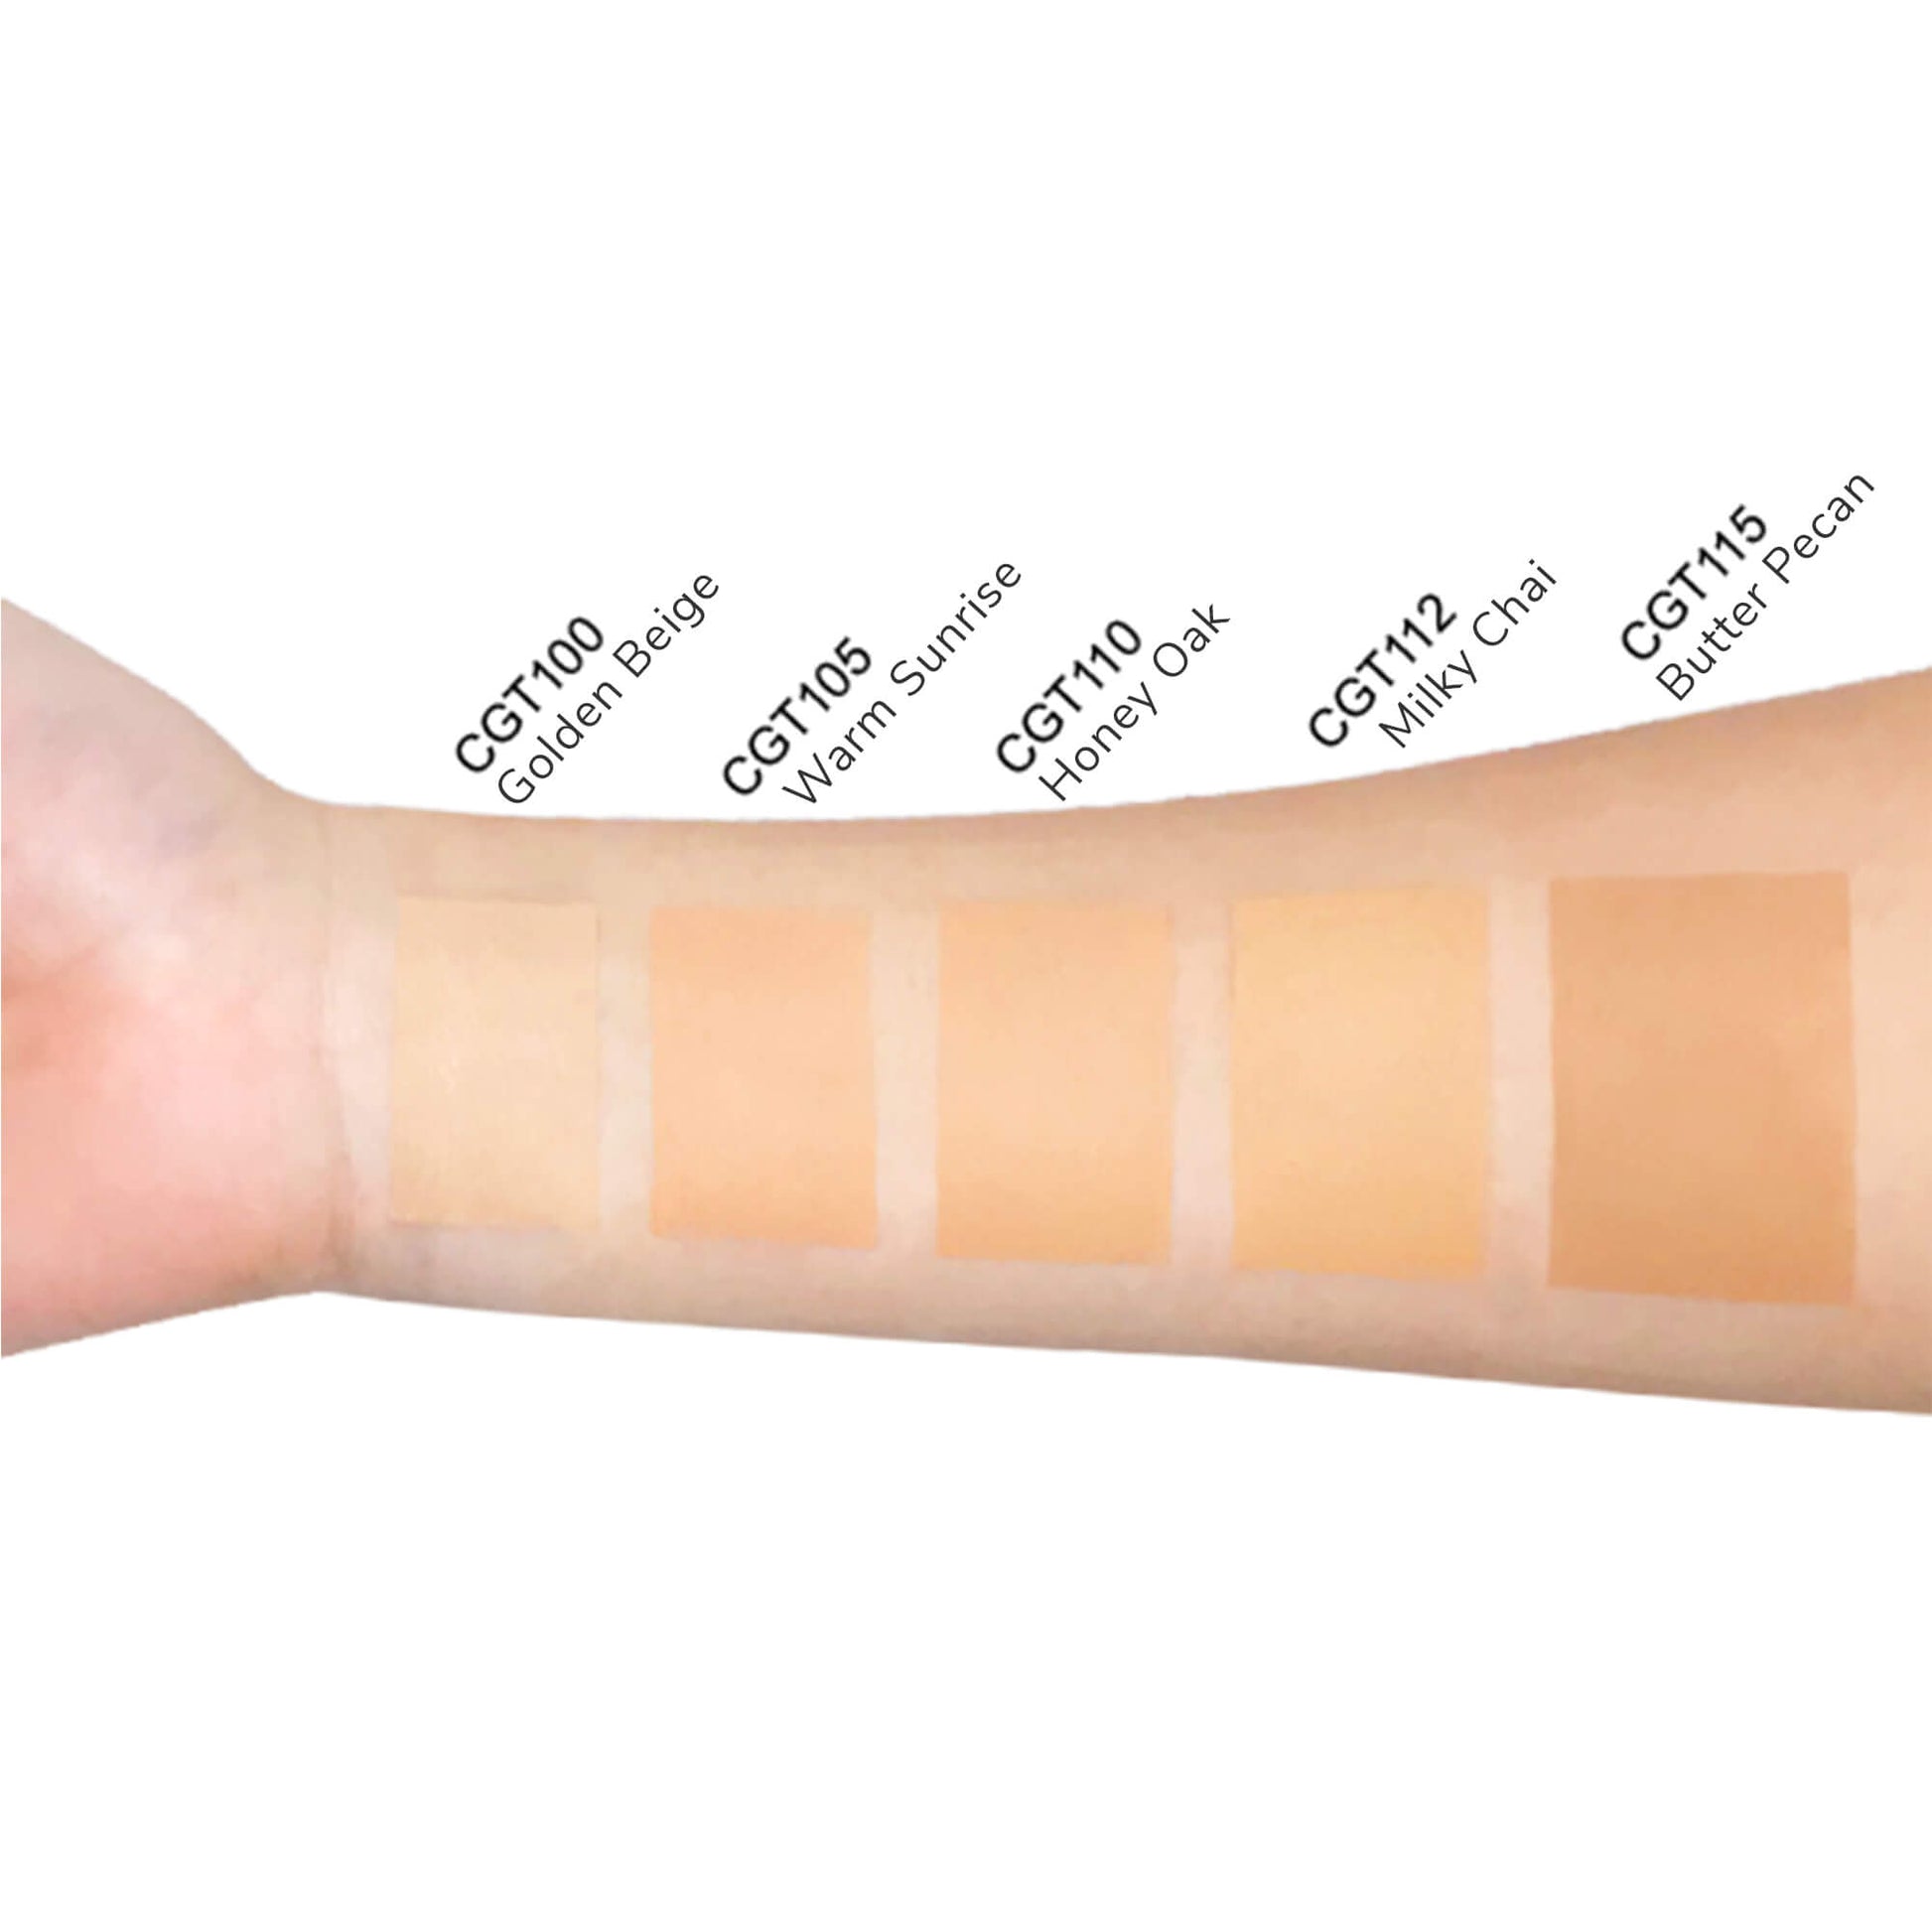 Get ready to unveil a flawless, camera-ready complexion with Cruisin Organics' Honey Oak Concealer Stick. With its luxurious and velvety formula, this deep-toned stick effortlessly conceals imperfections, leaving you with a smooth, matte finish. Use it to sculpt and brighten for a truly flawless look.